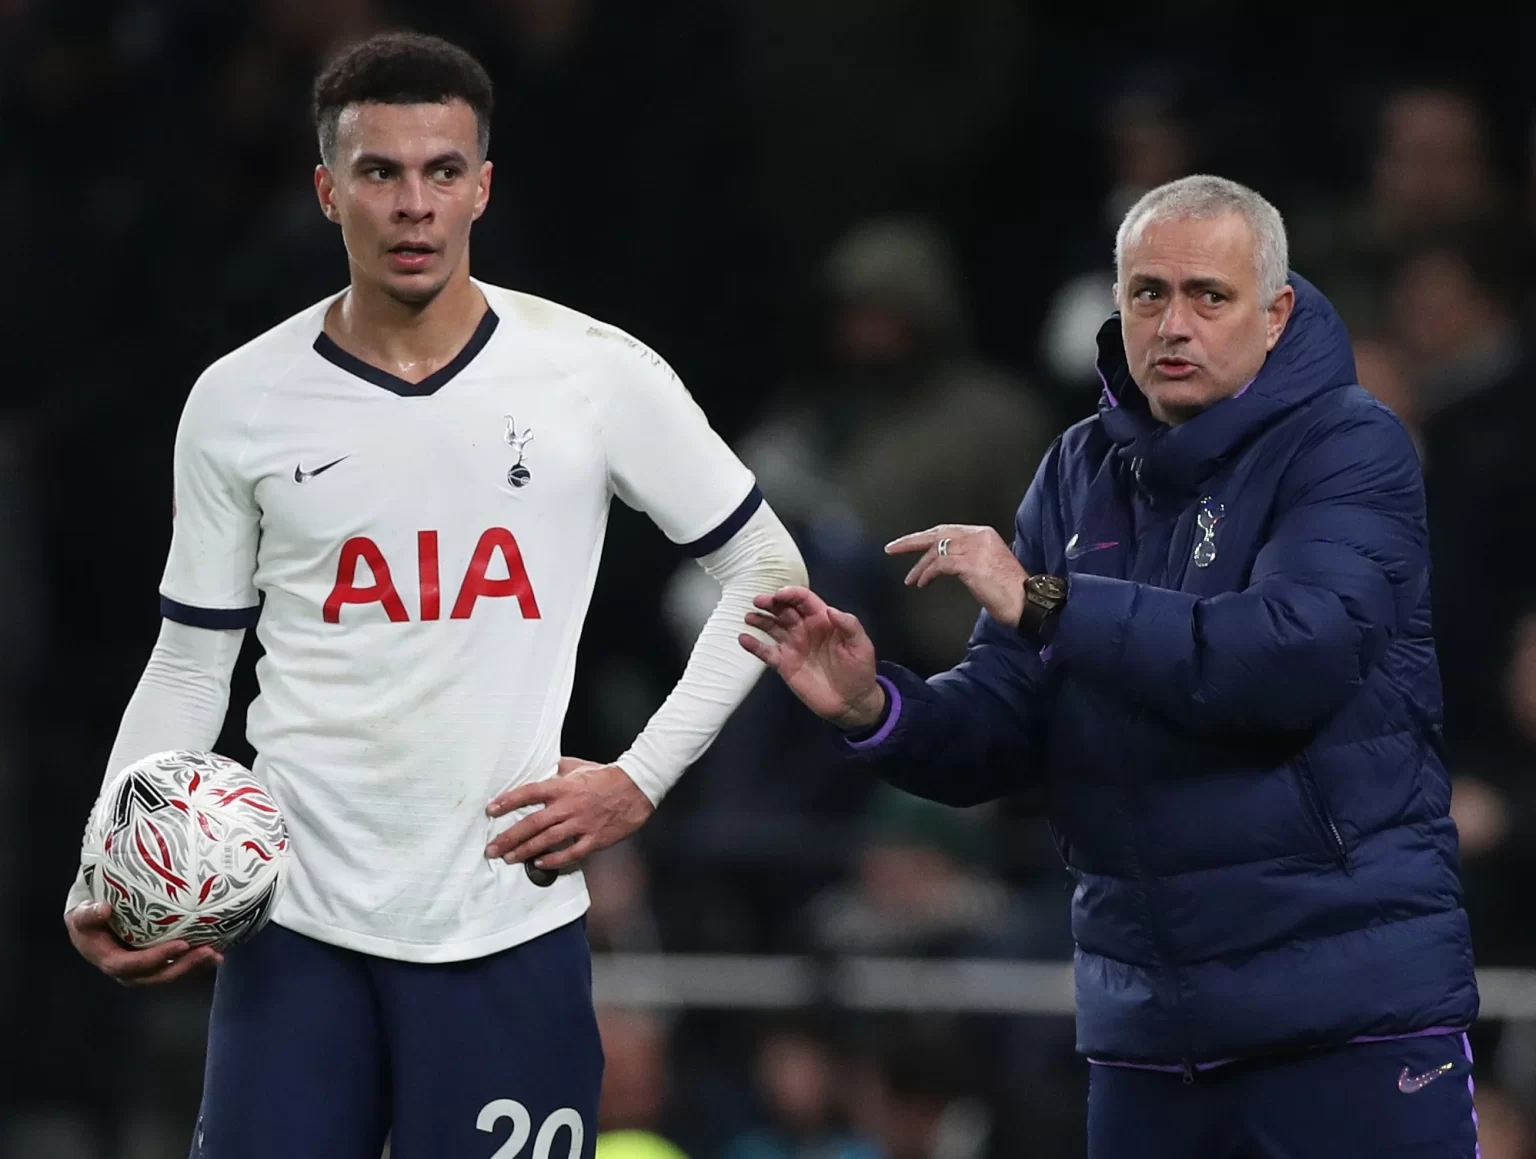 Jose Mourinho apologised to Dele Alli for ‘lazy’ insult – but it wasn’t shown by Amazon